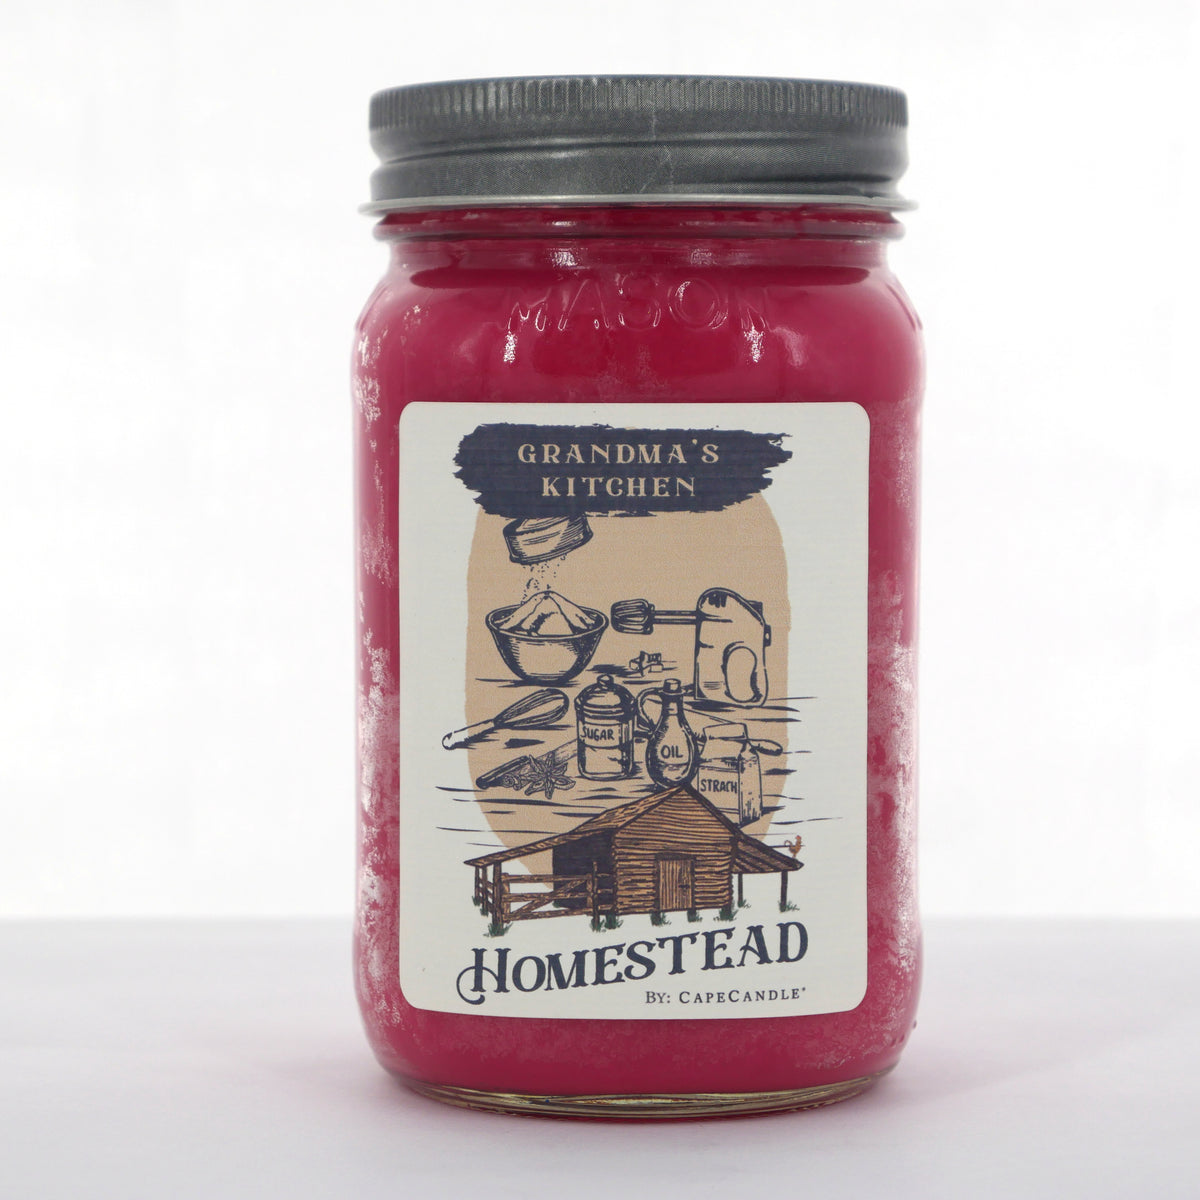 Grandma's Kitchen Soy Candle 16oz Homestead Mason Jar by Cape Candle